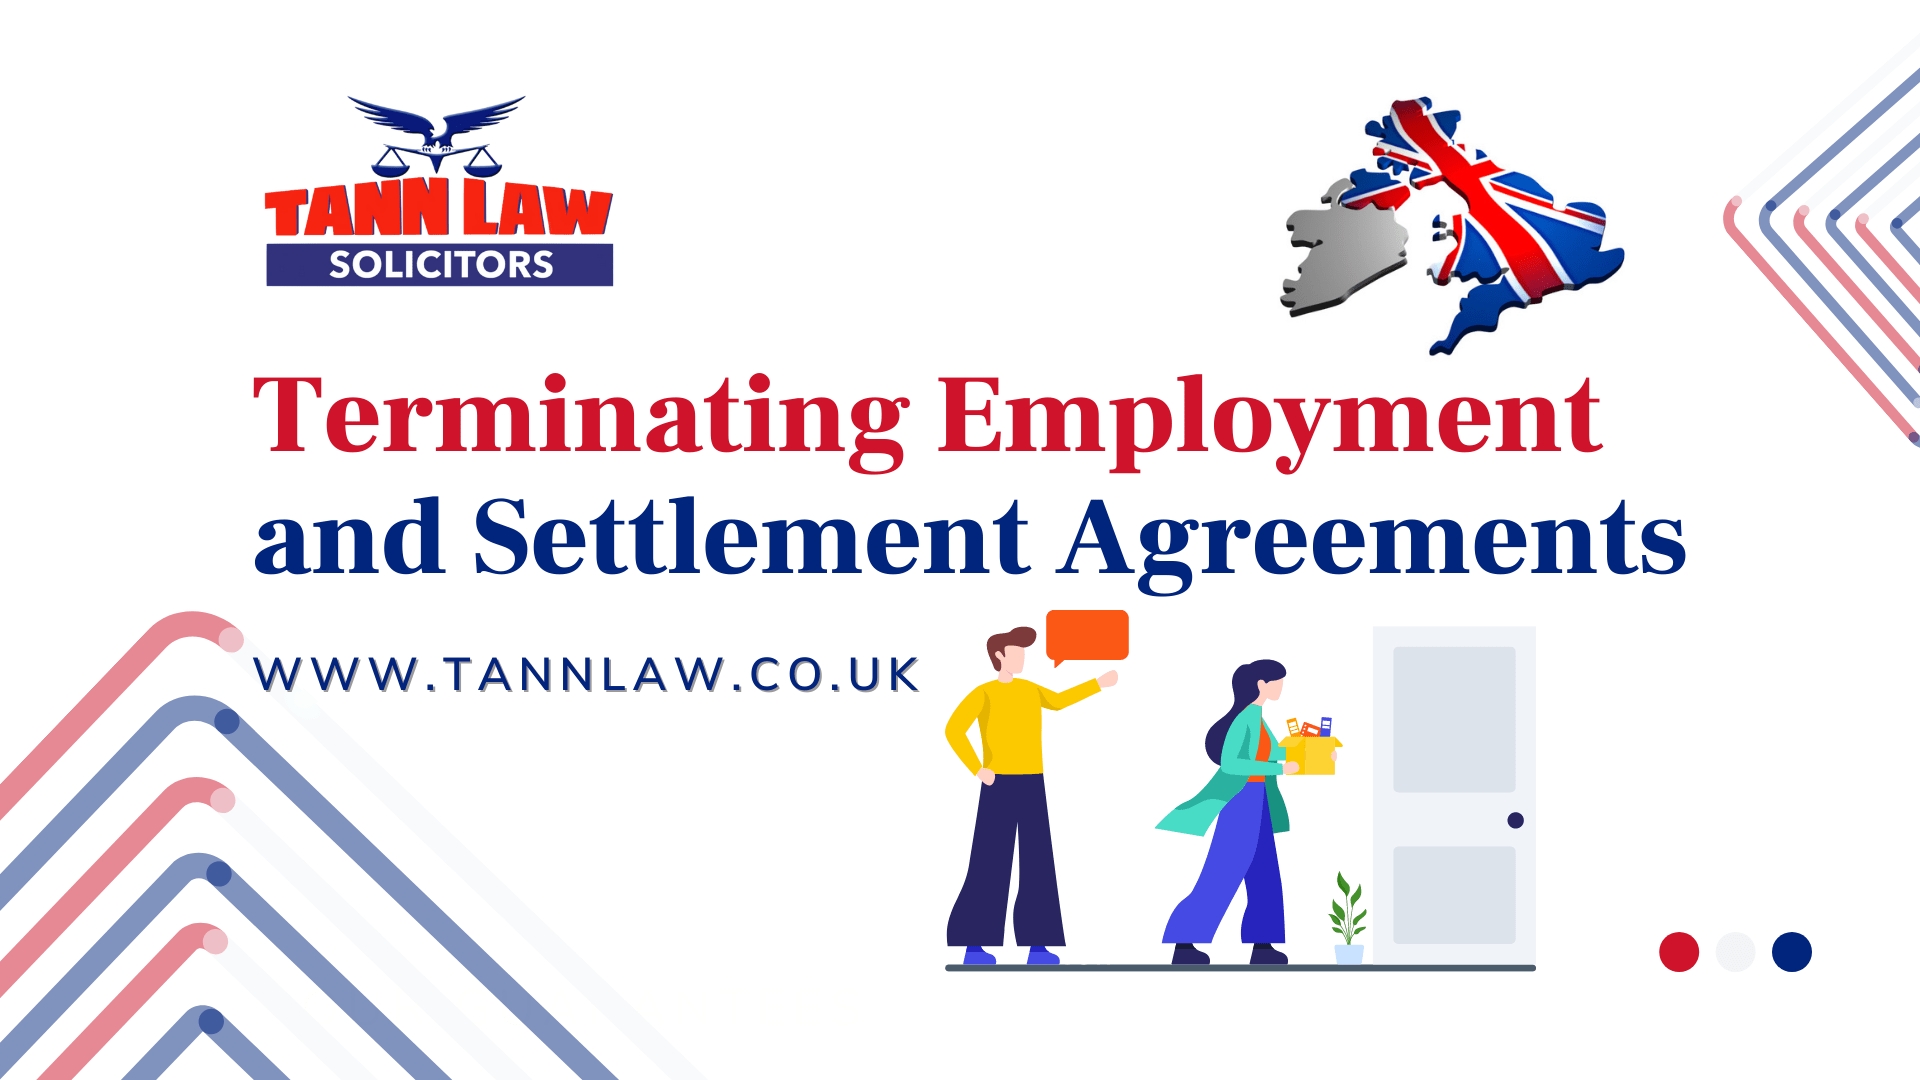 Terminating Employment and Settlement Agreements